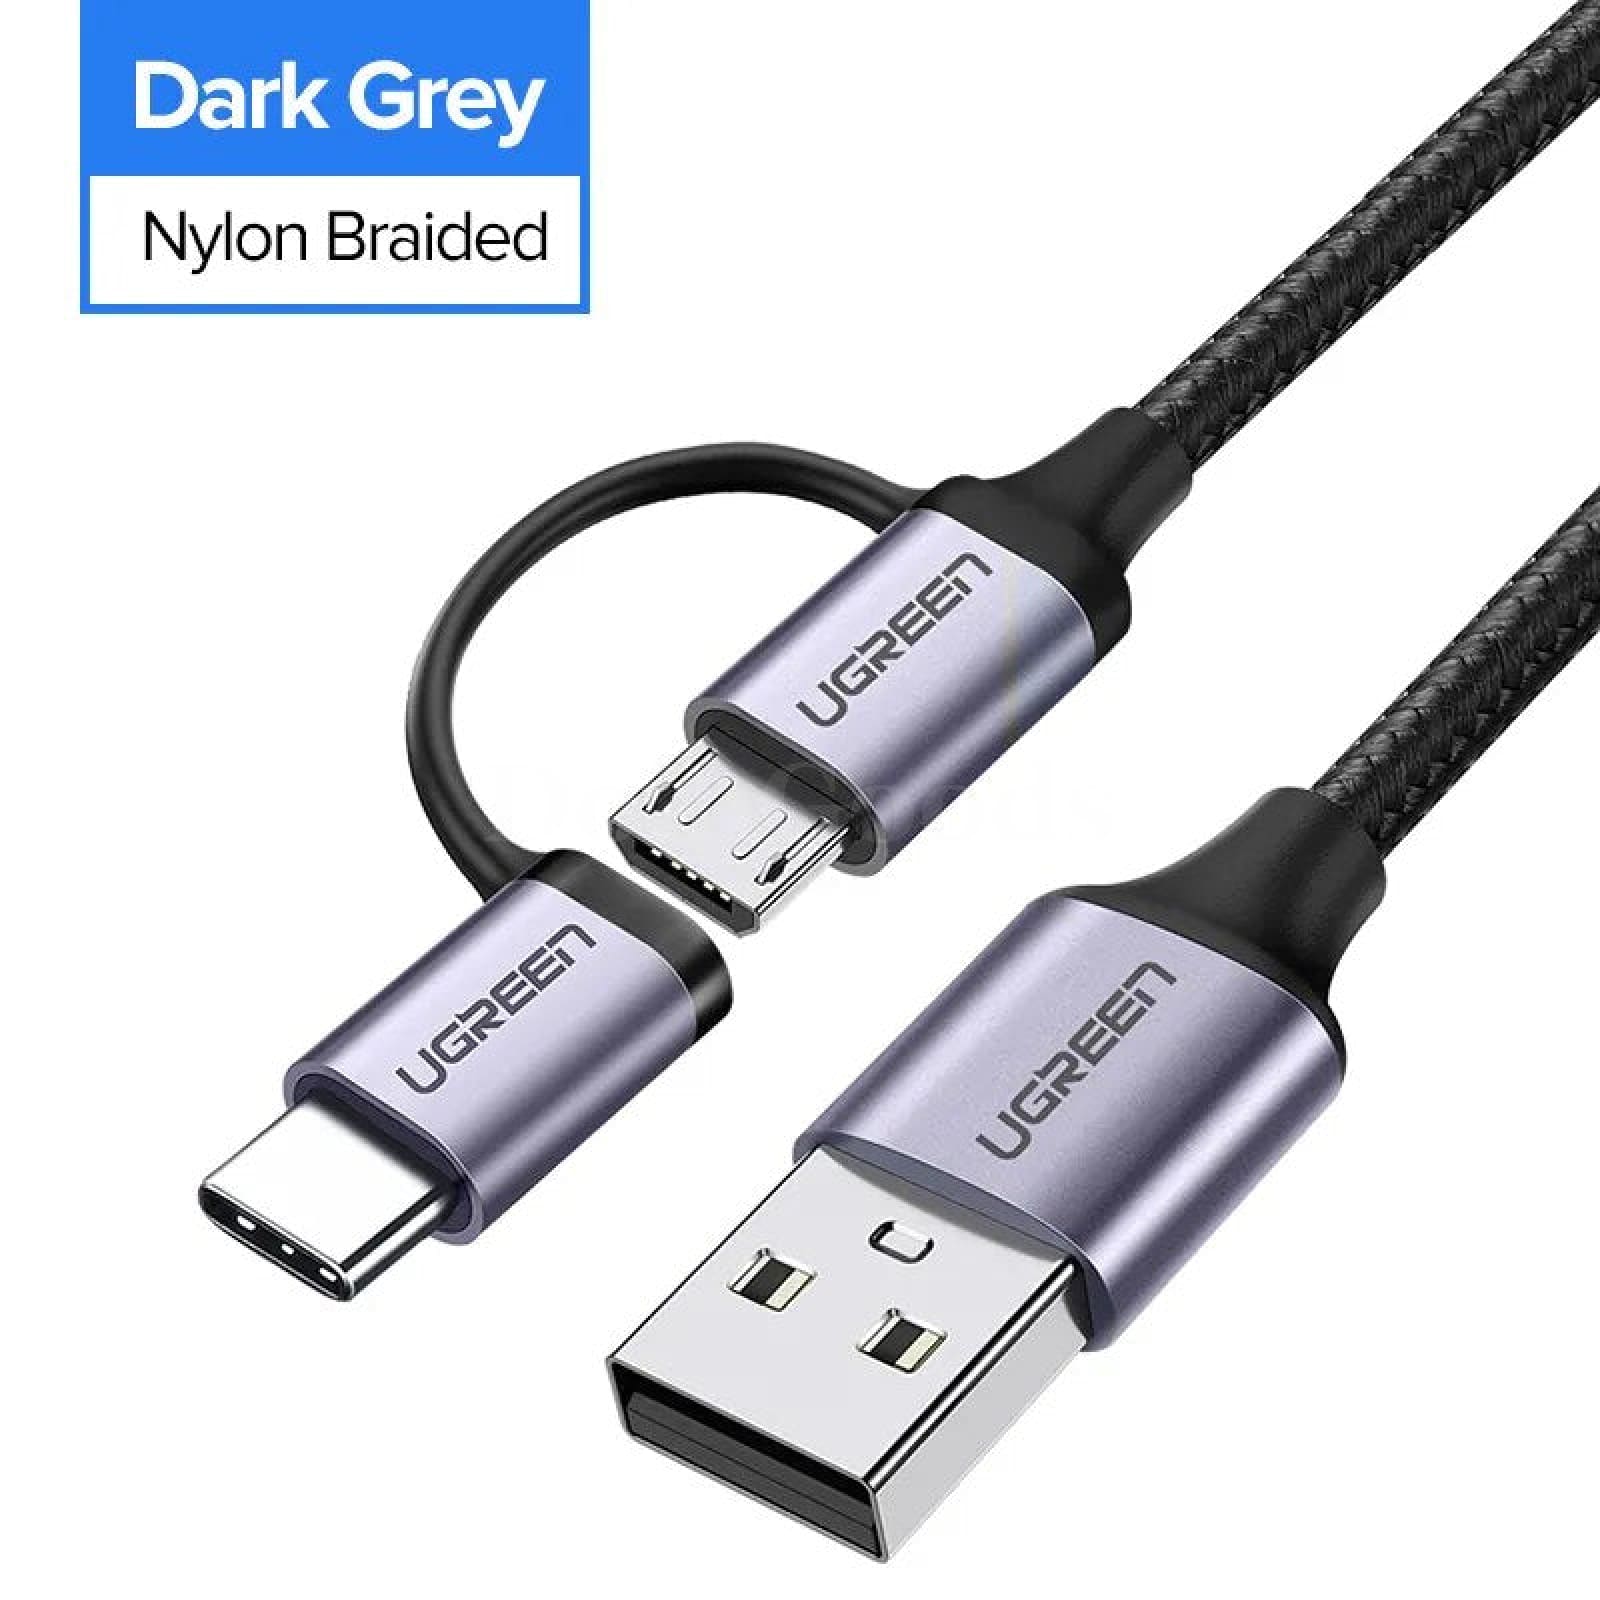 Ugreen 2-In-1 Usb Type C And Micro Cable For Samsung Galaxy S10 S9 - Fast Charging Data Transfer 2